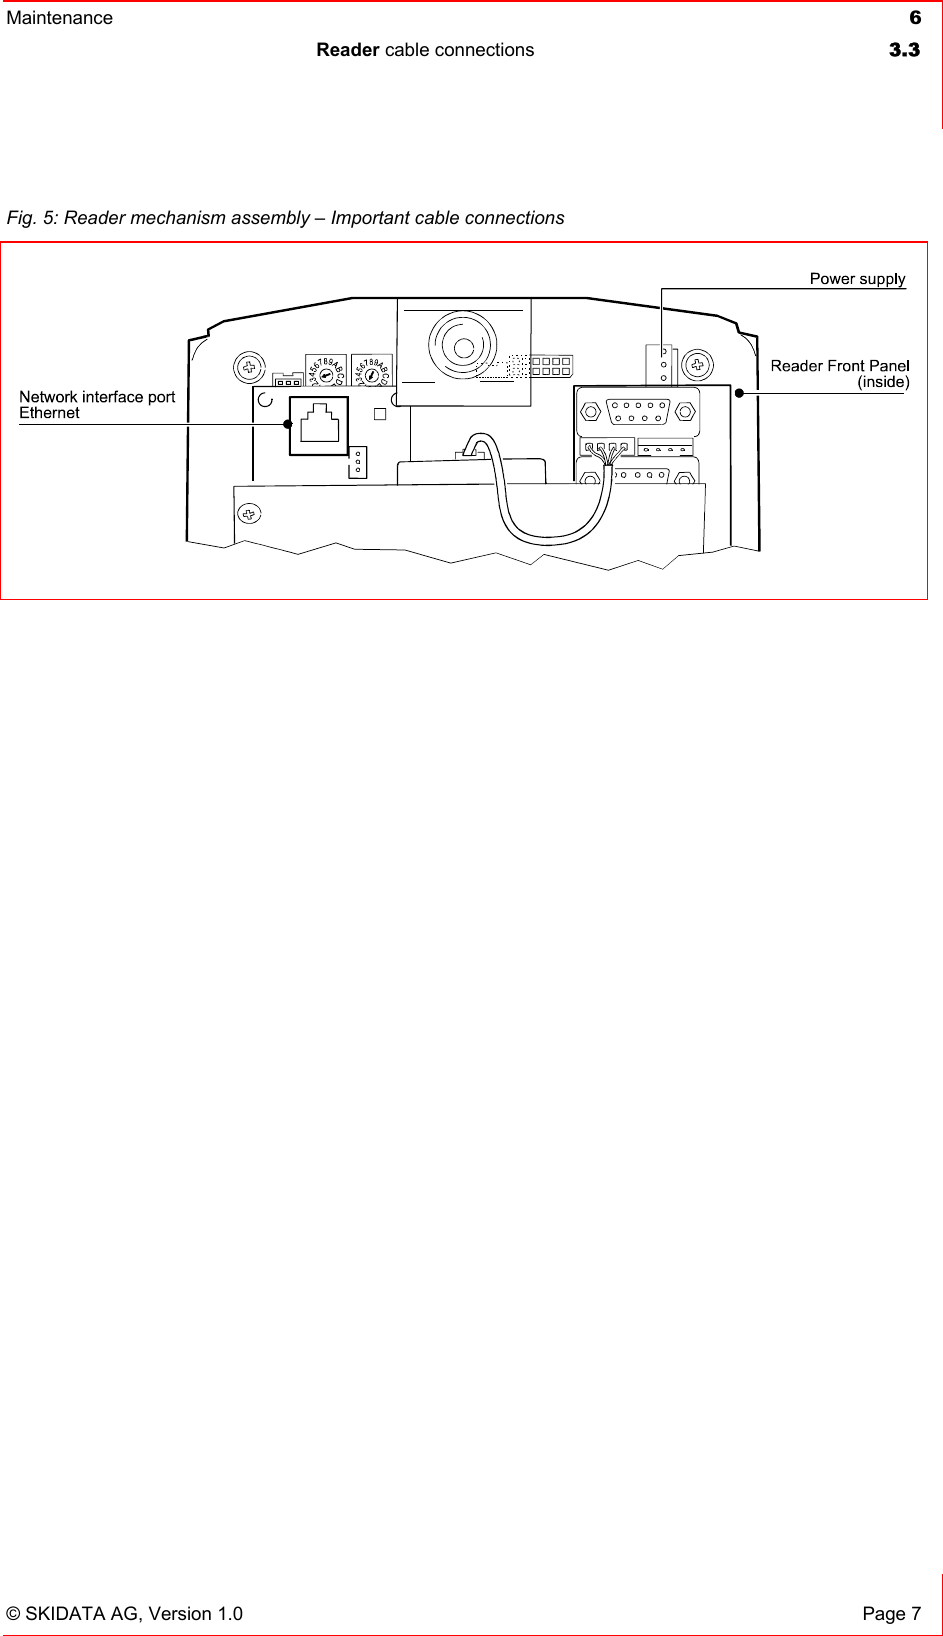 Maintenance  6 Reader cable connections  3.3   © SKIDATA AG, Version 1.0  Page 7 Fig. 5: Reader mechanism assembly – Important cable connections    